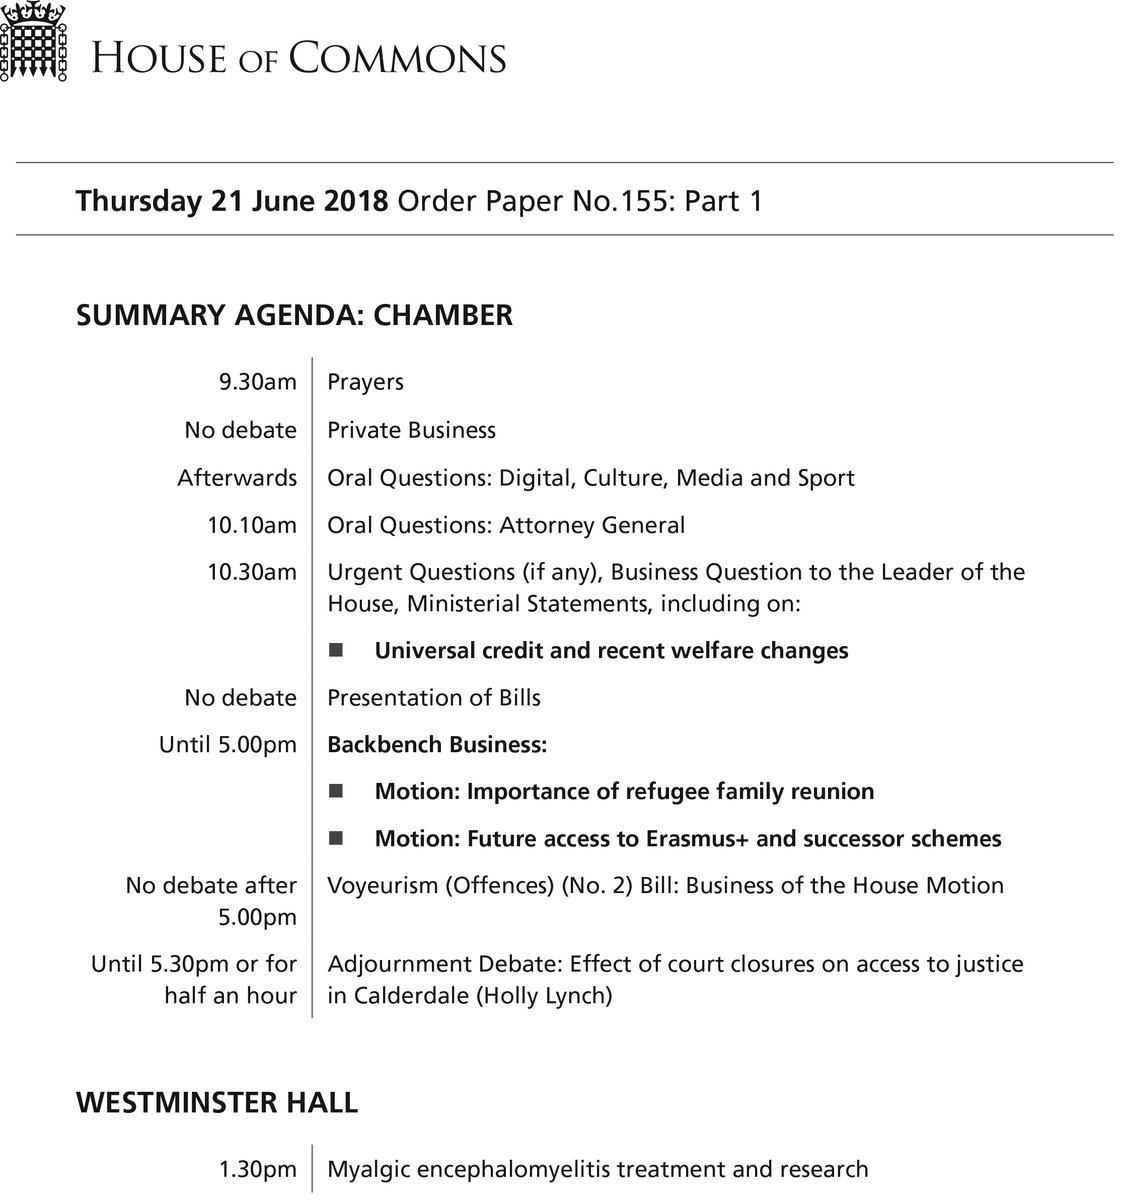 Image shows the Commons Order Paper for Thursday 21 June 2018. Click on the link in the tweet for the html version.